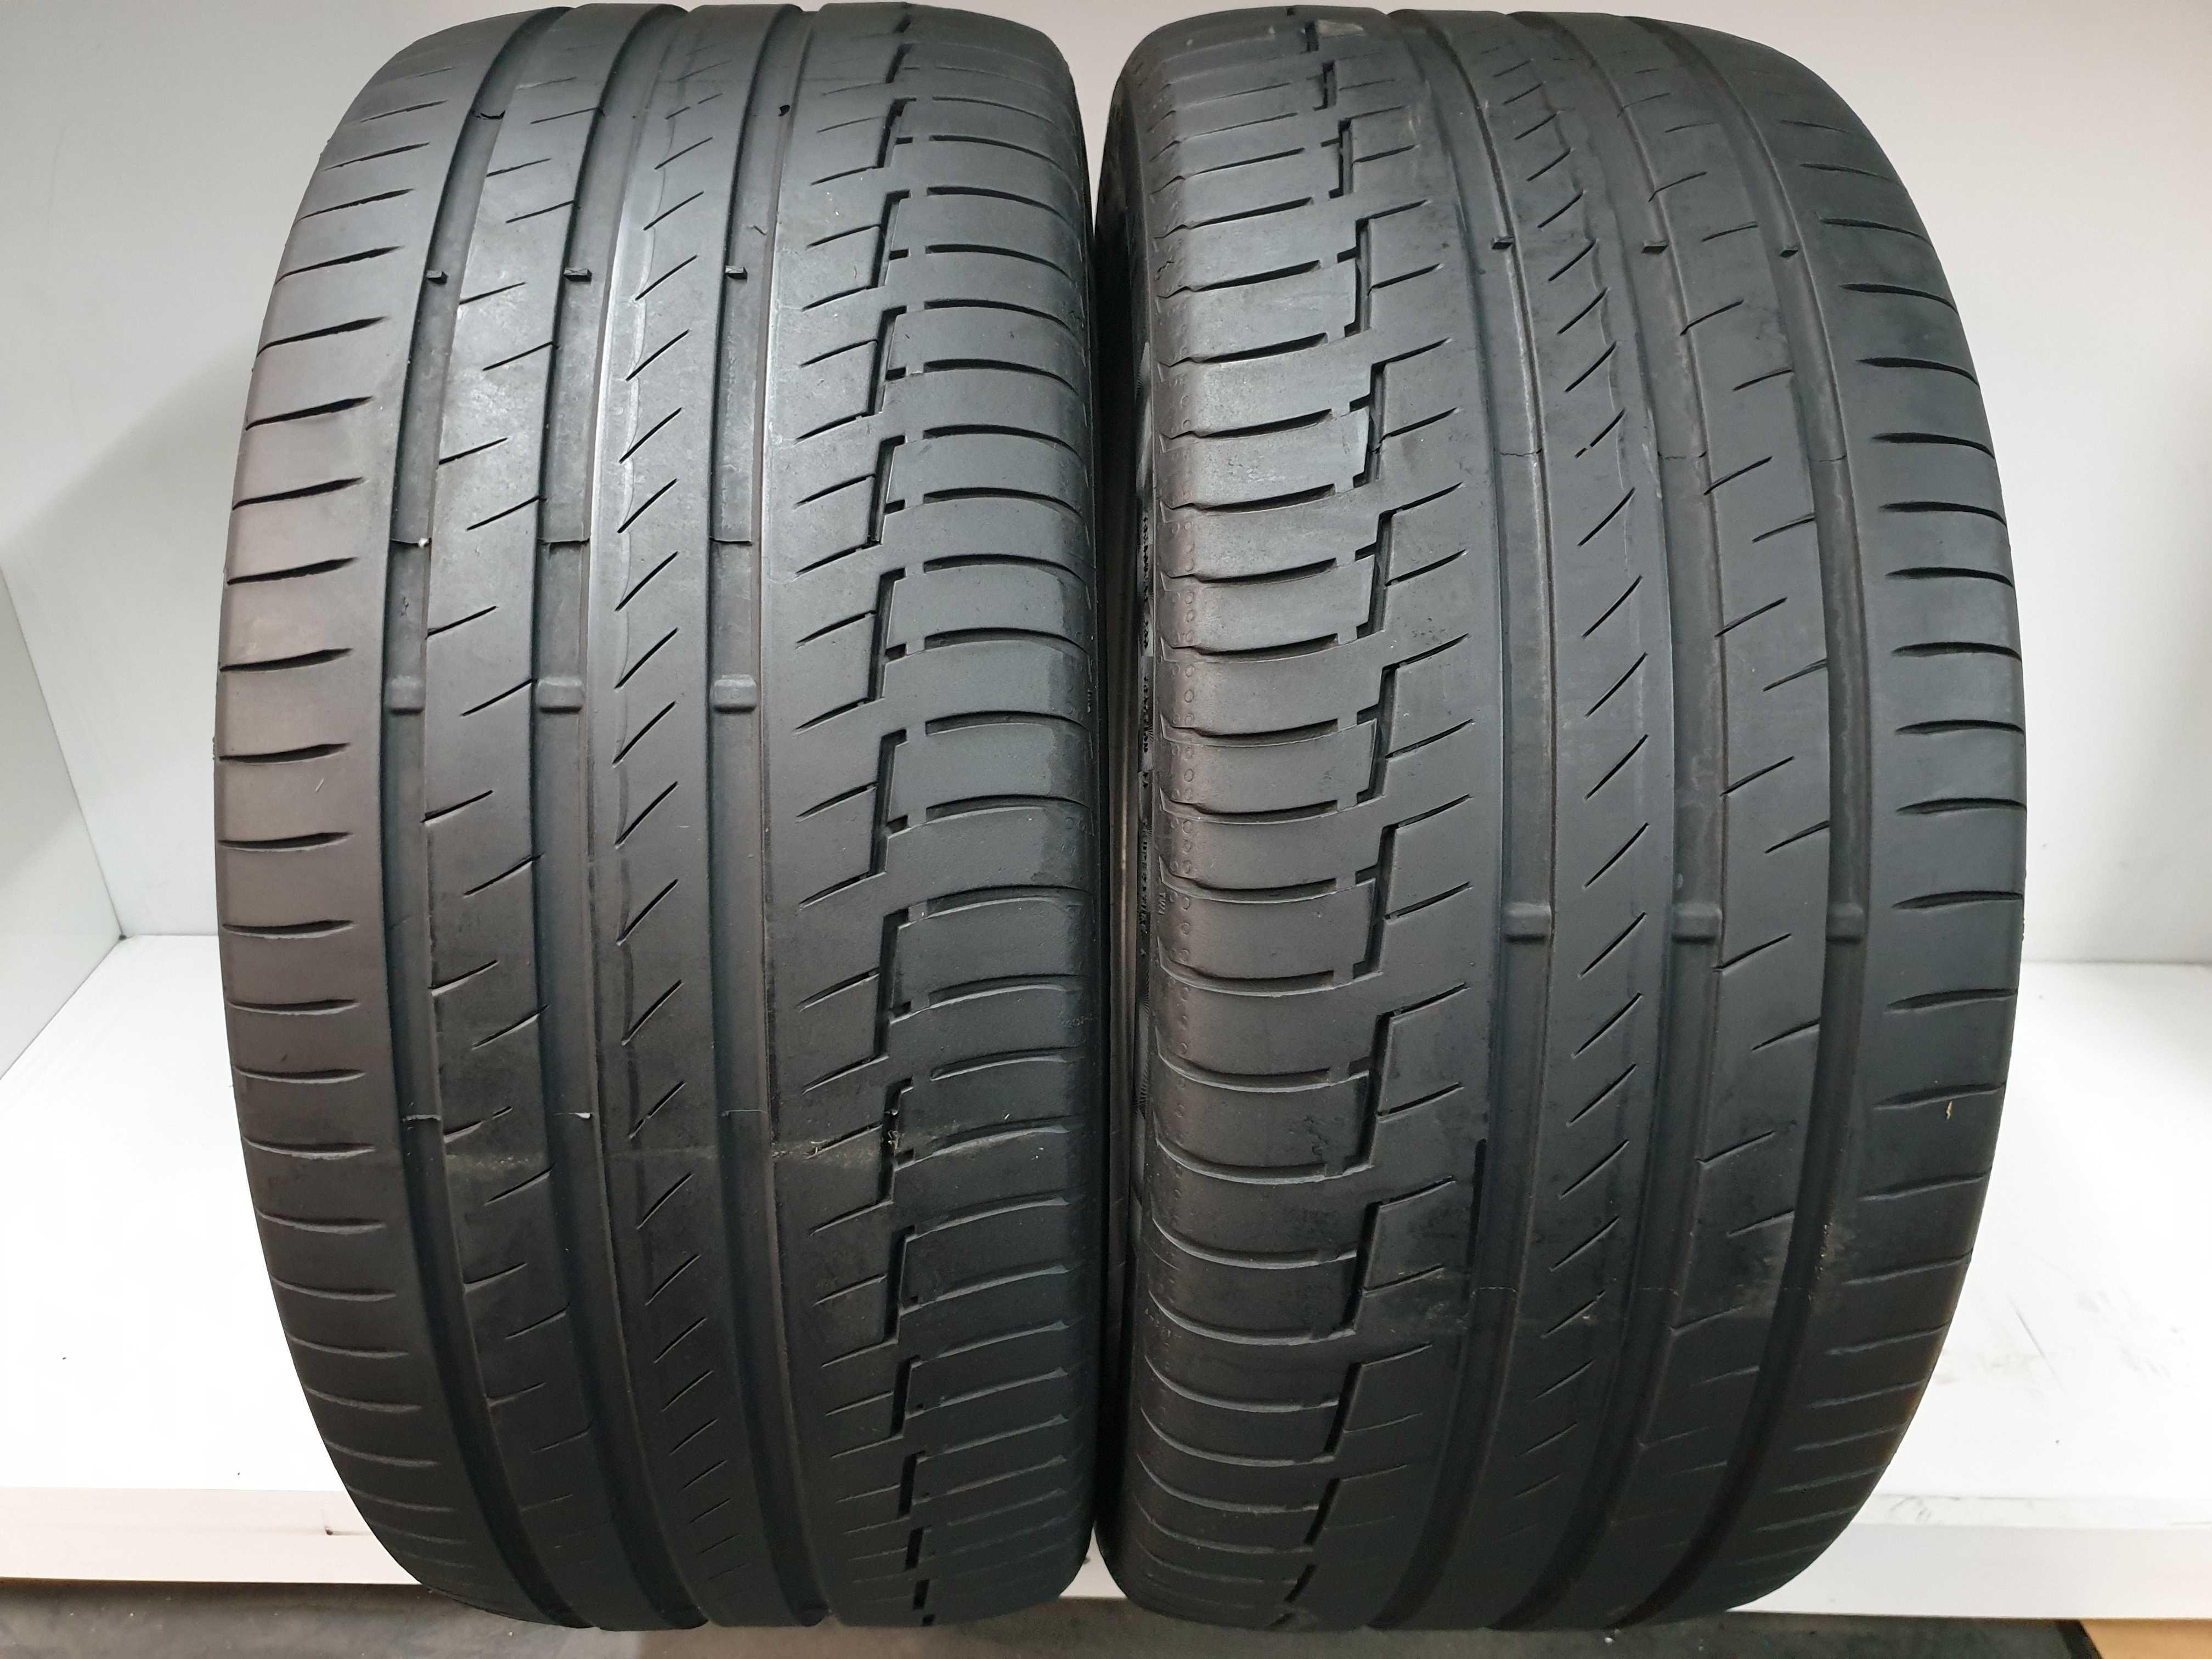 Anvelope Second Hand Continental Vara-275/45 R20 110Y,in stoc R19/21